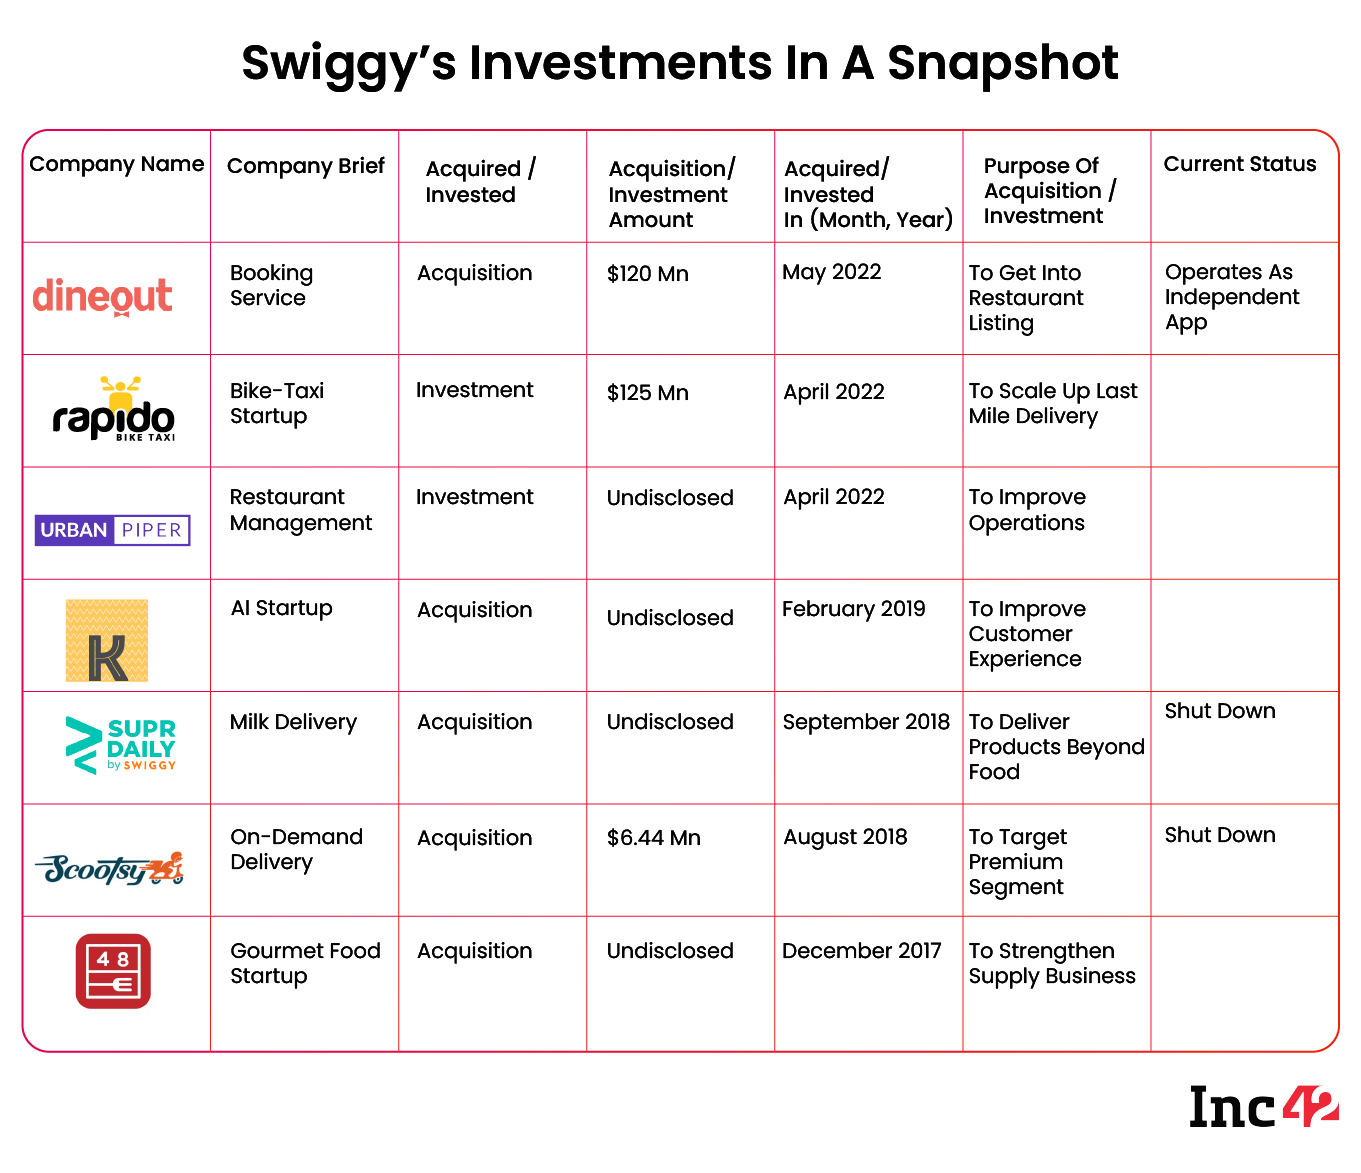 Swiggy investments in a snapshot